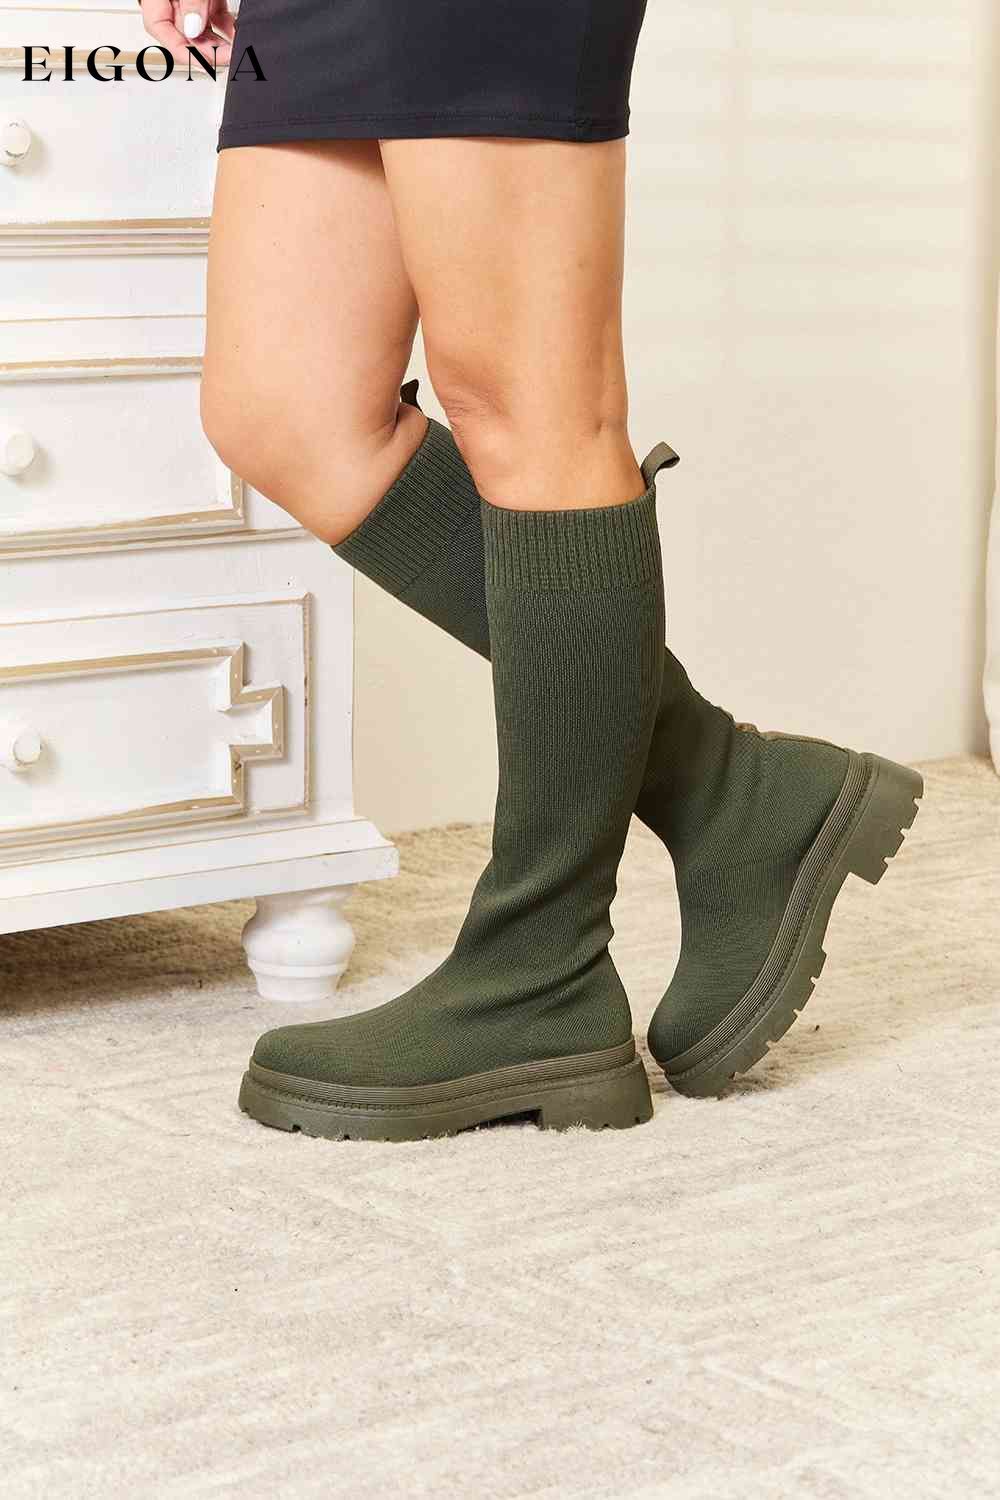 Footwear Knee High Platform Sock Boots Ship from USA Shoes WiLDDiVA womens shoes